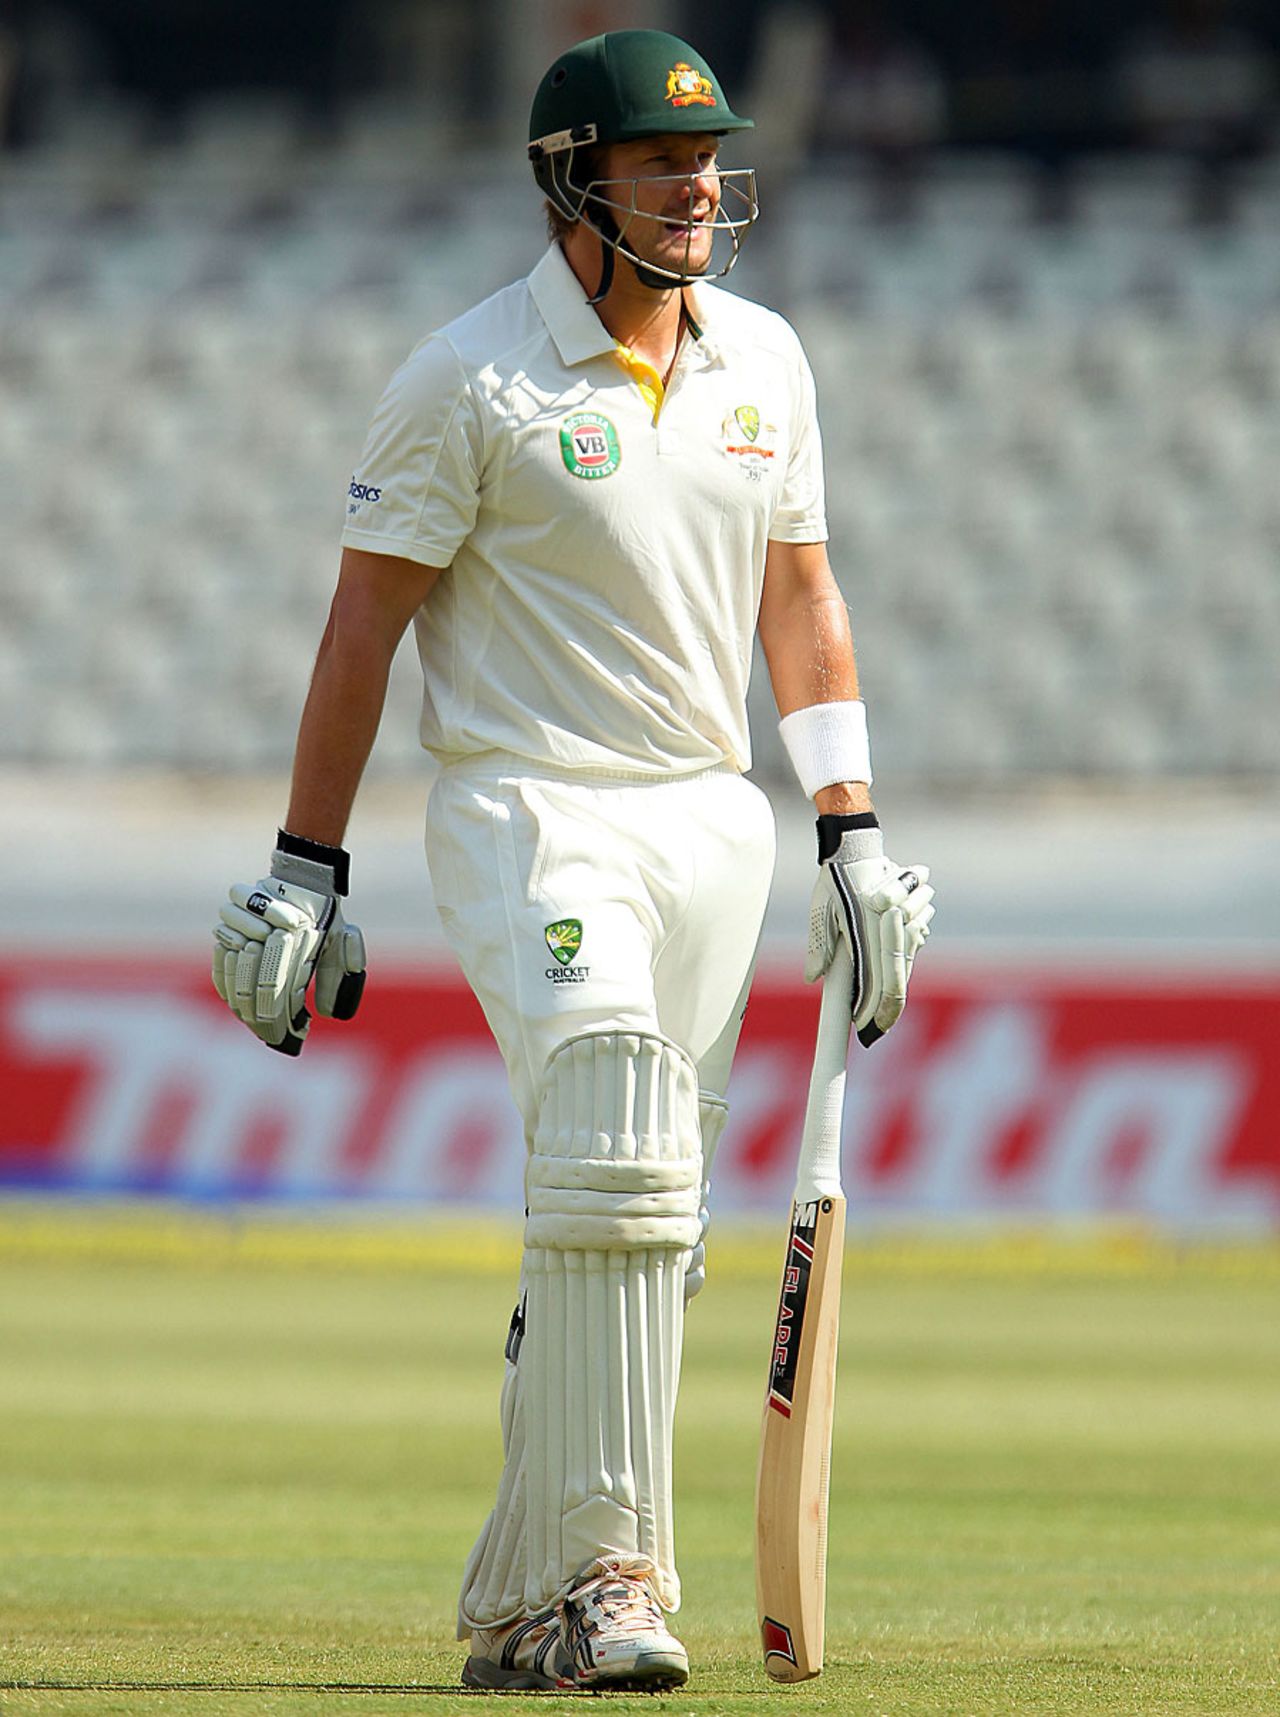 Shane Watson walks back after another failure, India v Australia, 2nd Test, Hyderabad, 4th day, March 5, 2013